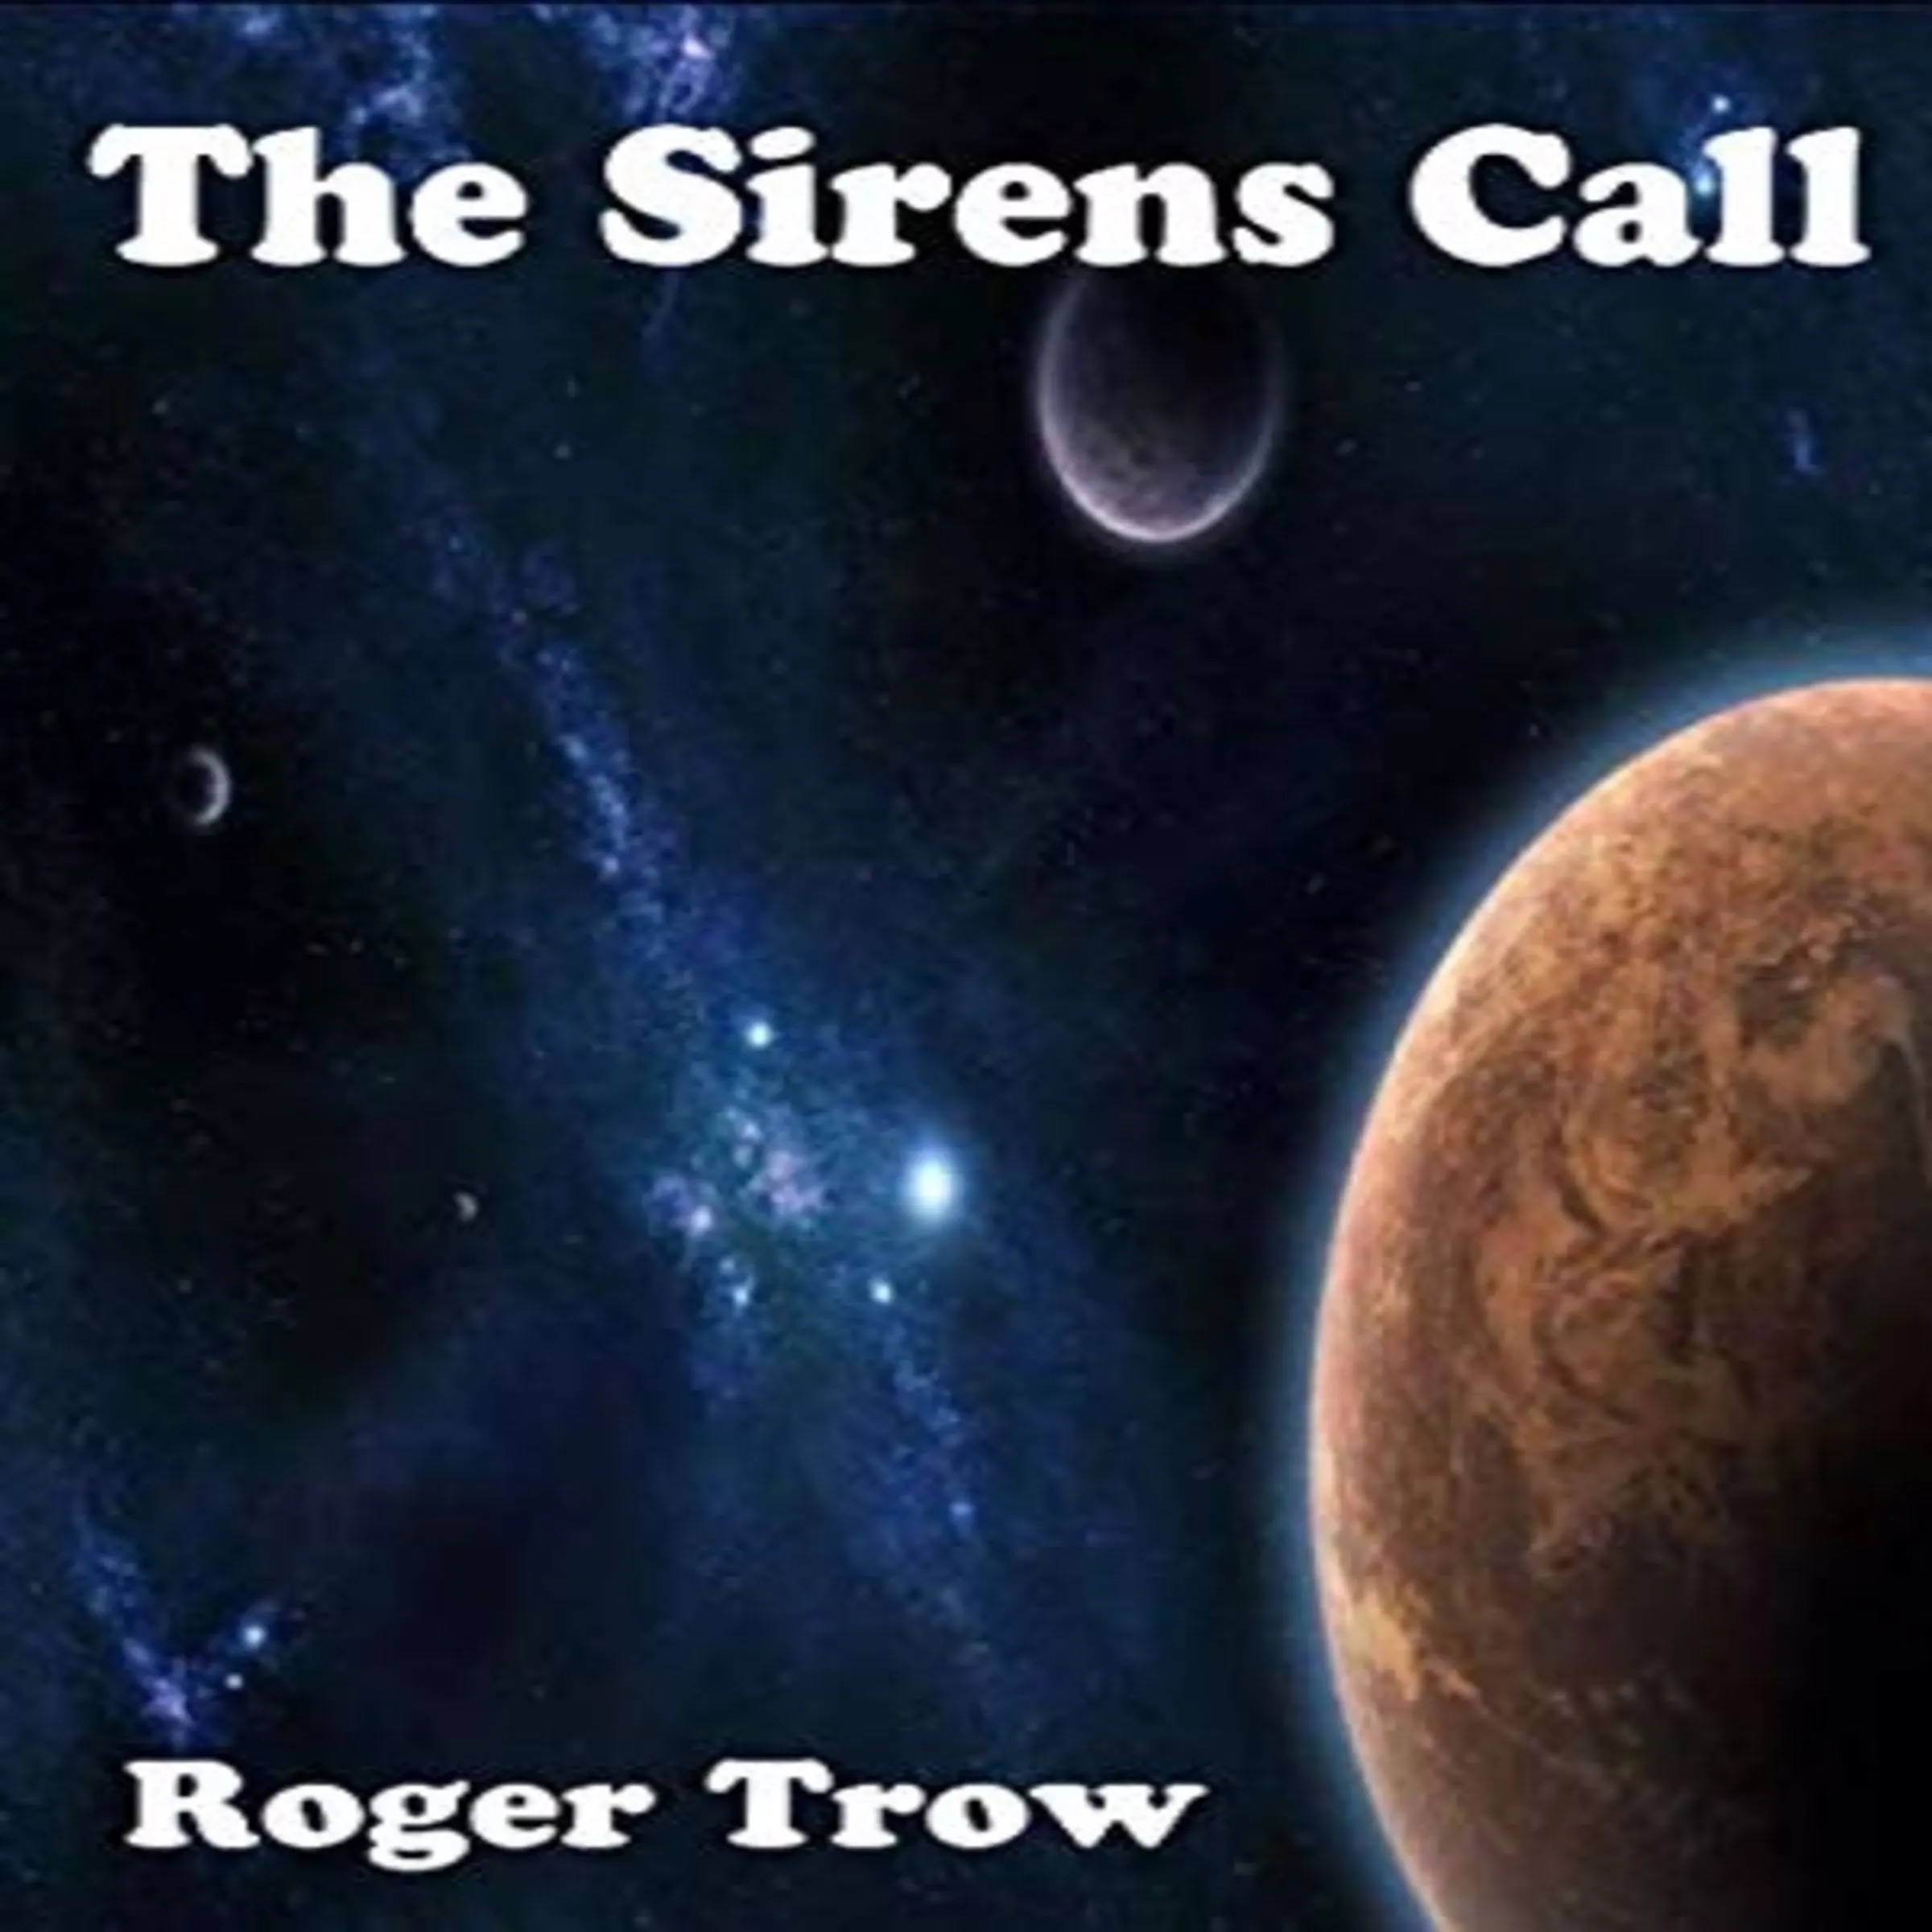 The Siren's Call by Roger Trow Audiobook